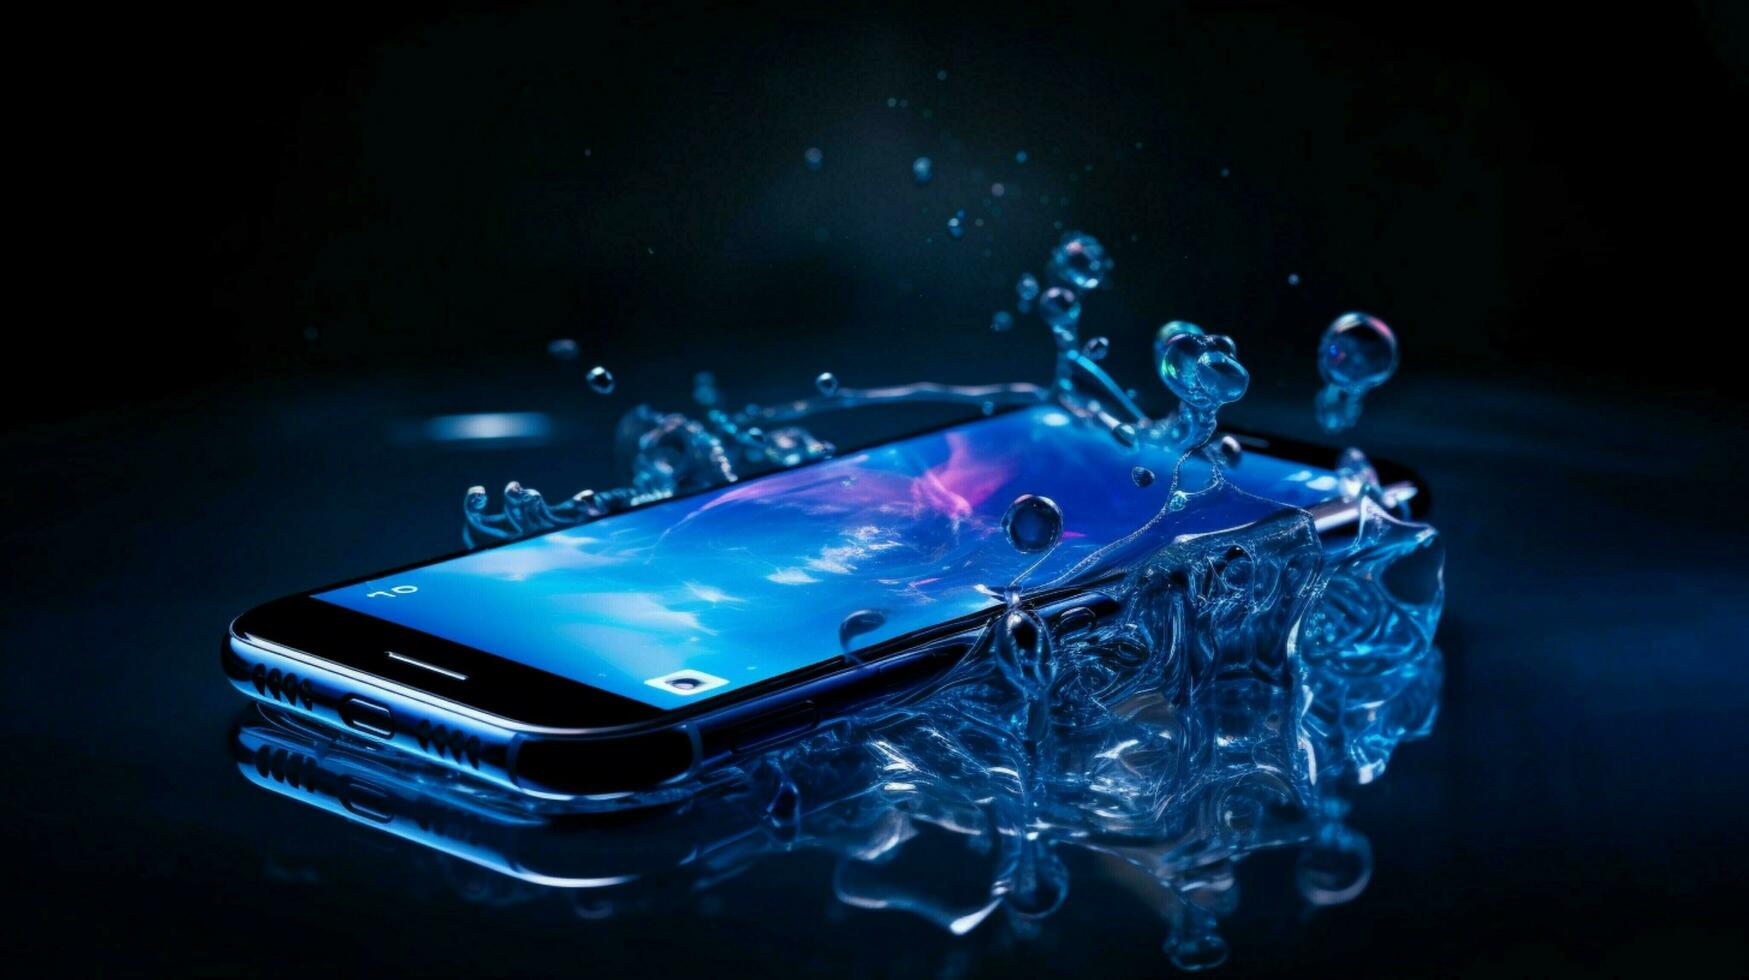 mobile phone glowing in blue reflection glass photo